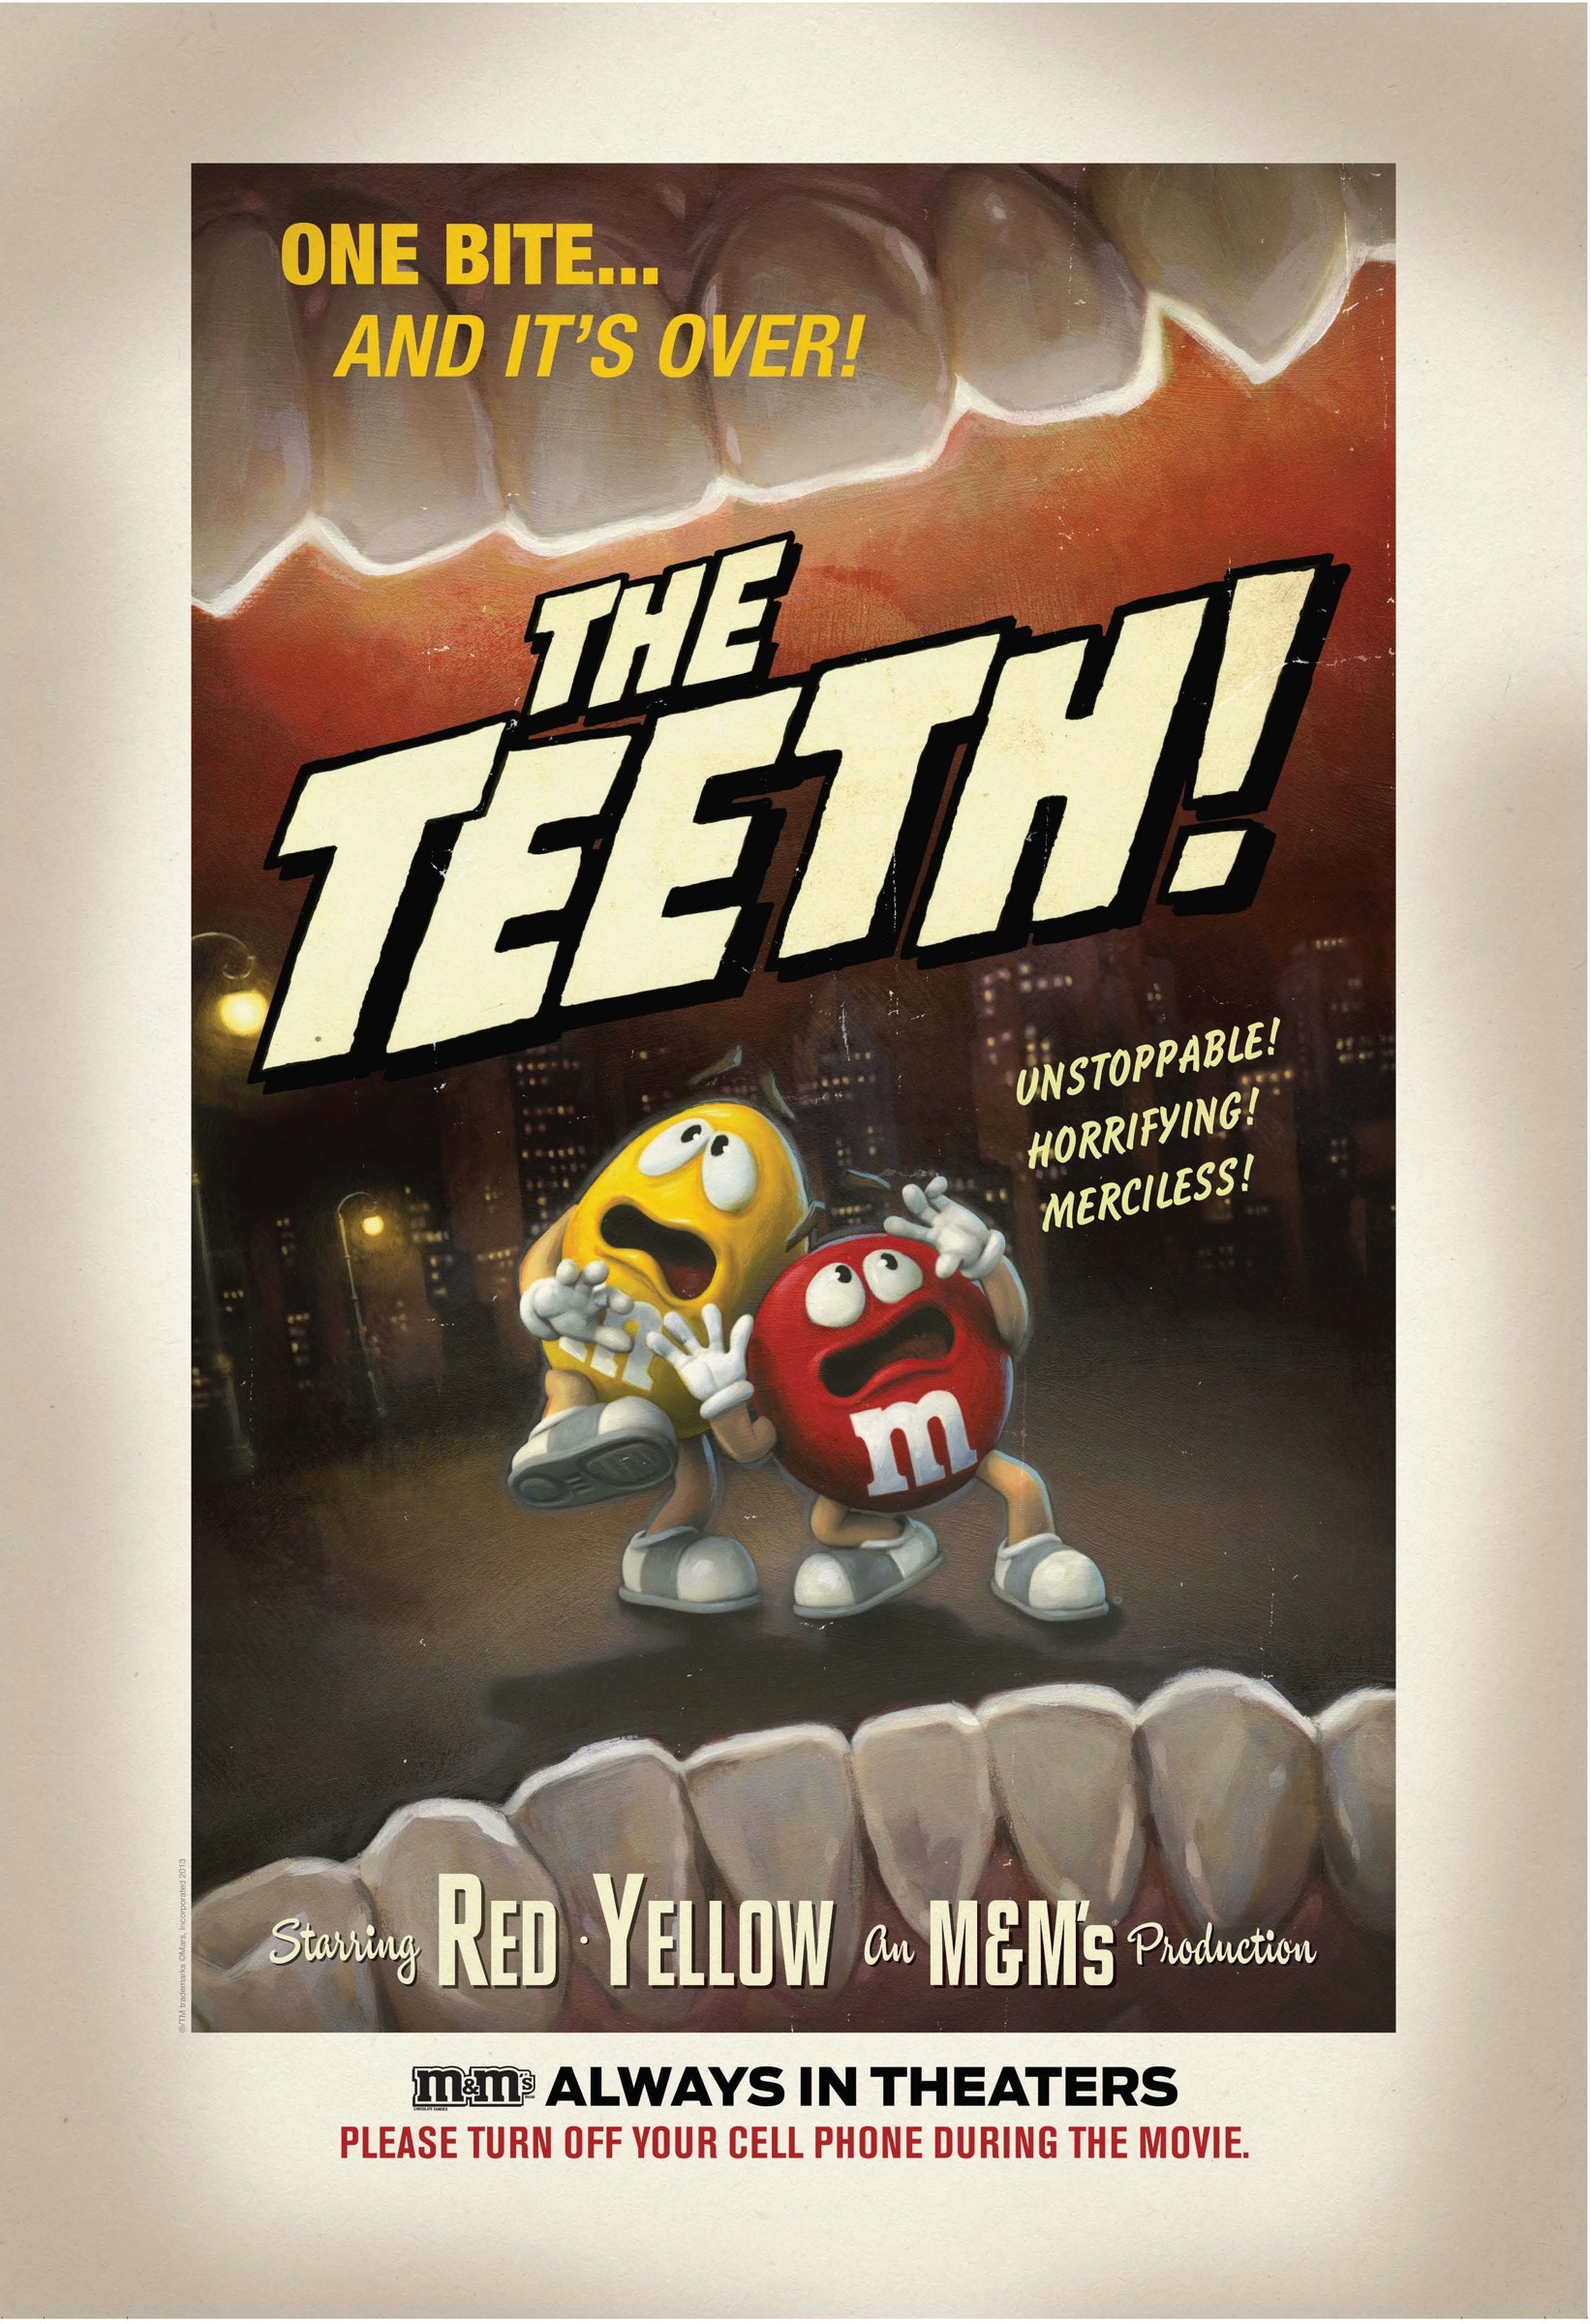 M&M's: The teeth!, Trailer • Ads of the World™